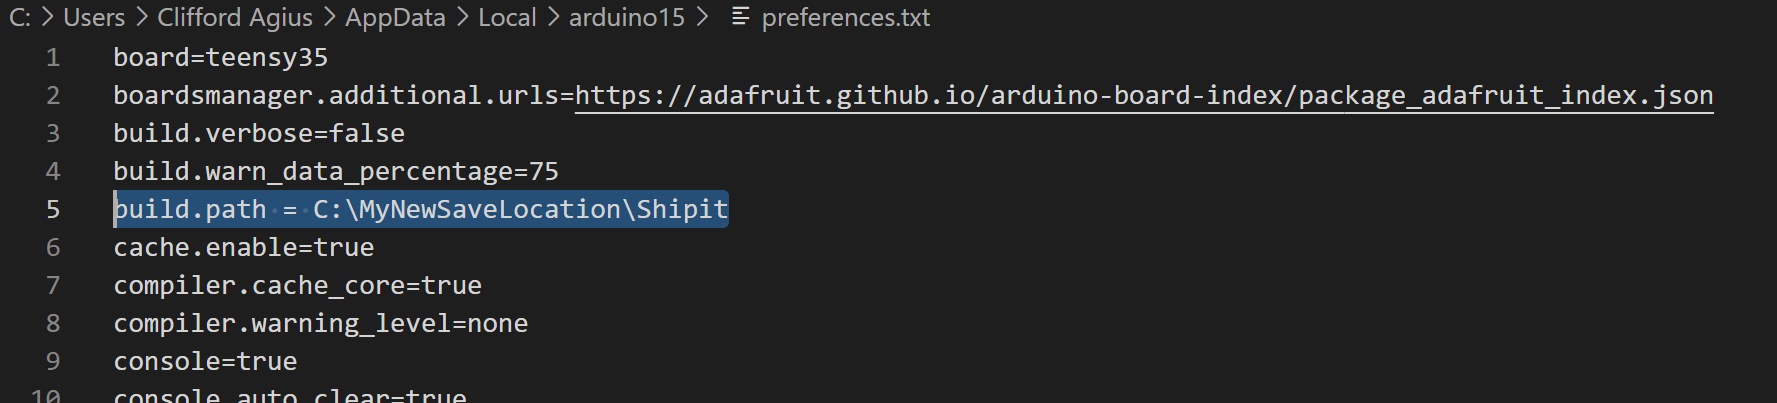 Build.Path added to the Preference.txt file